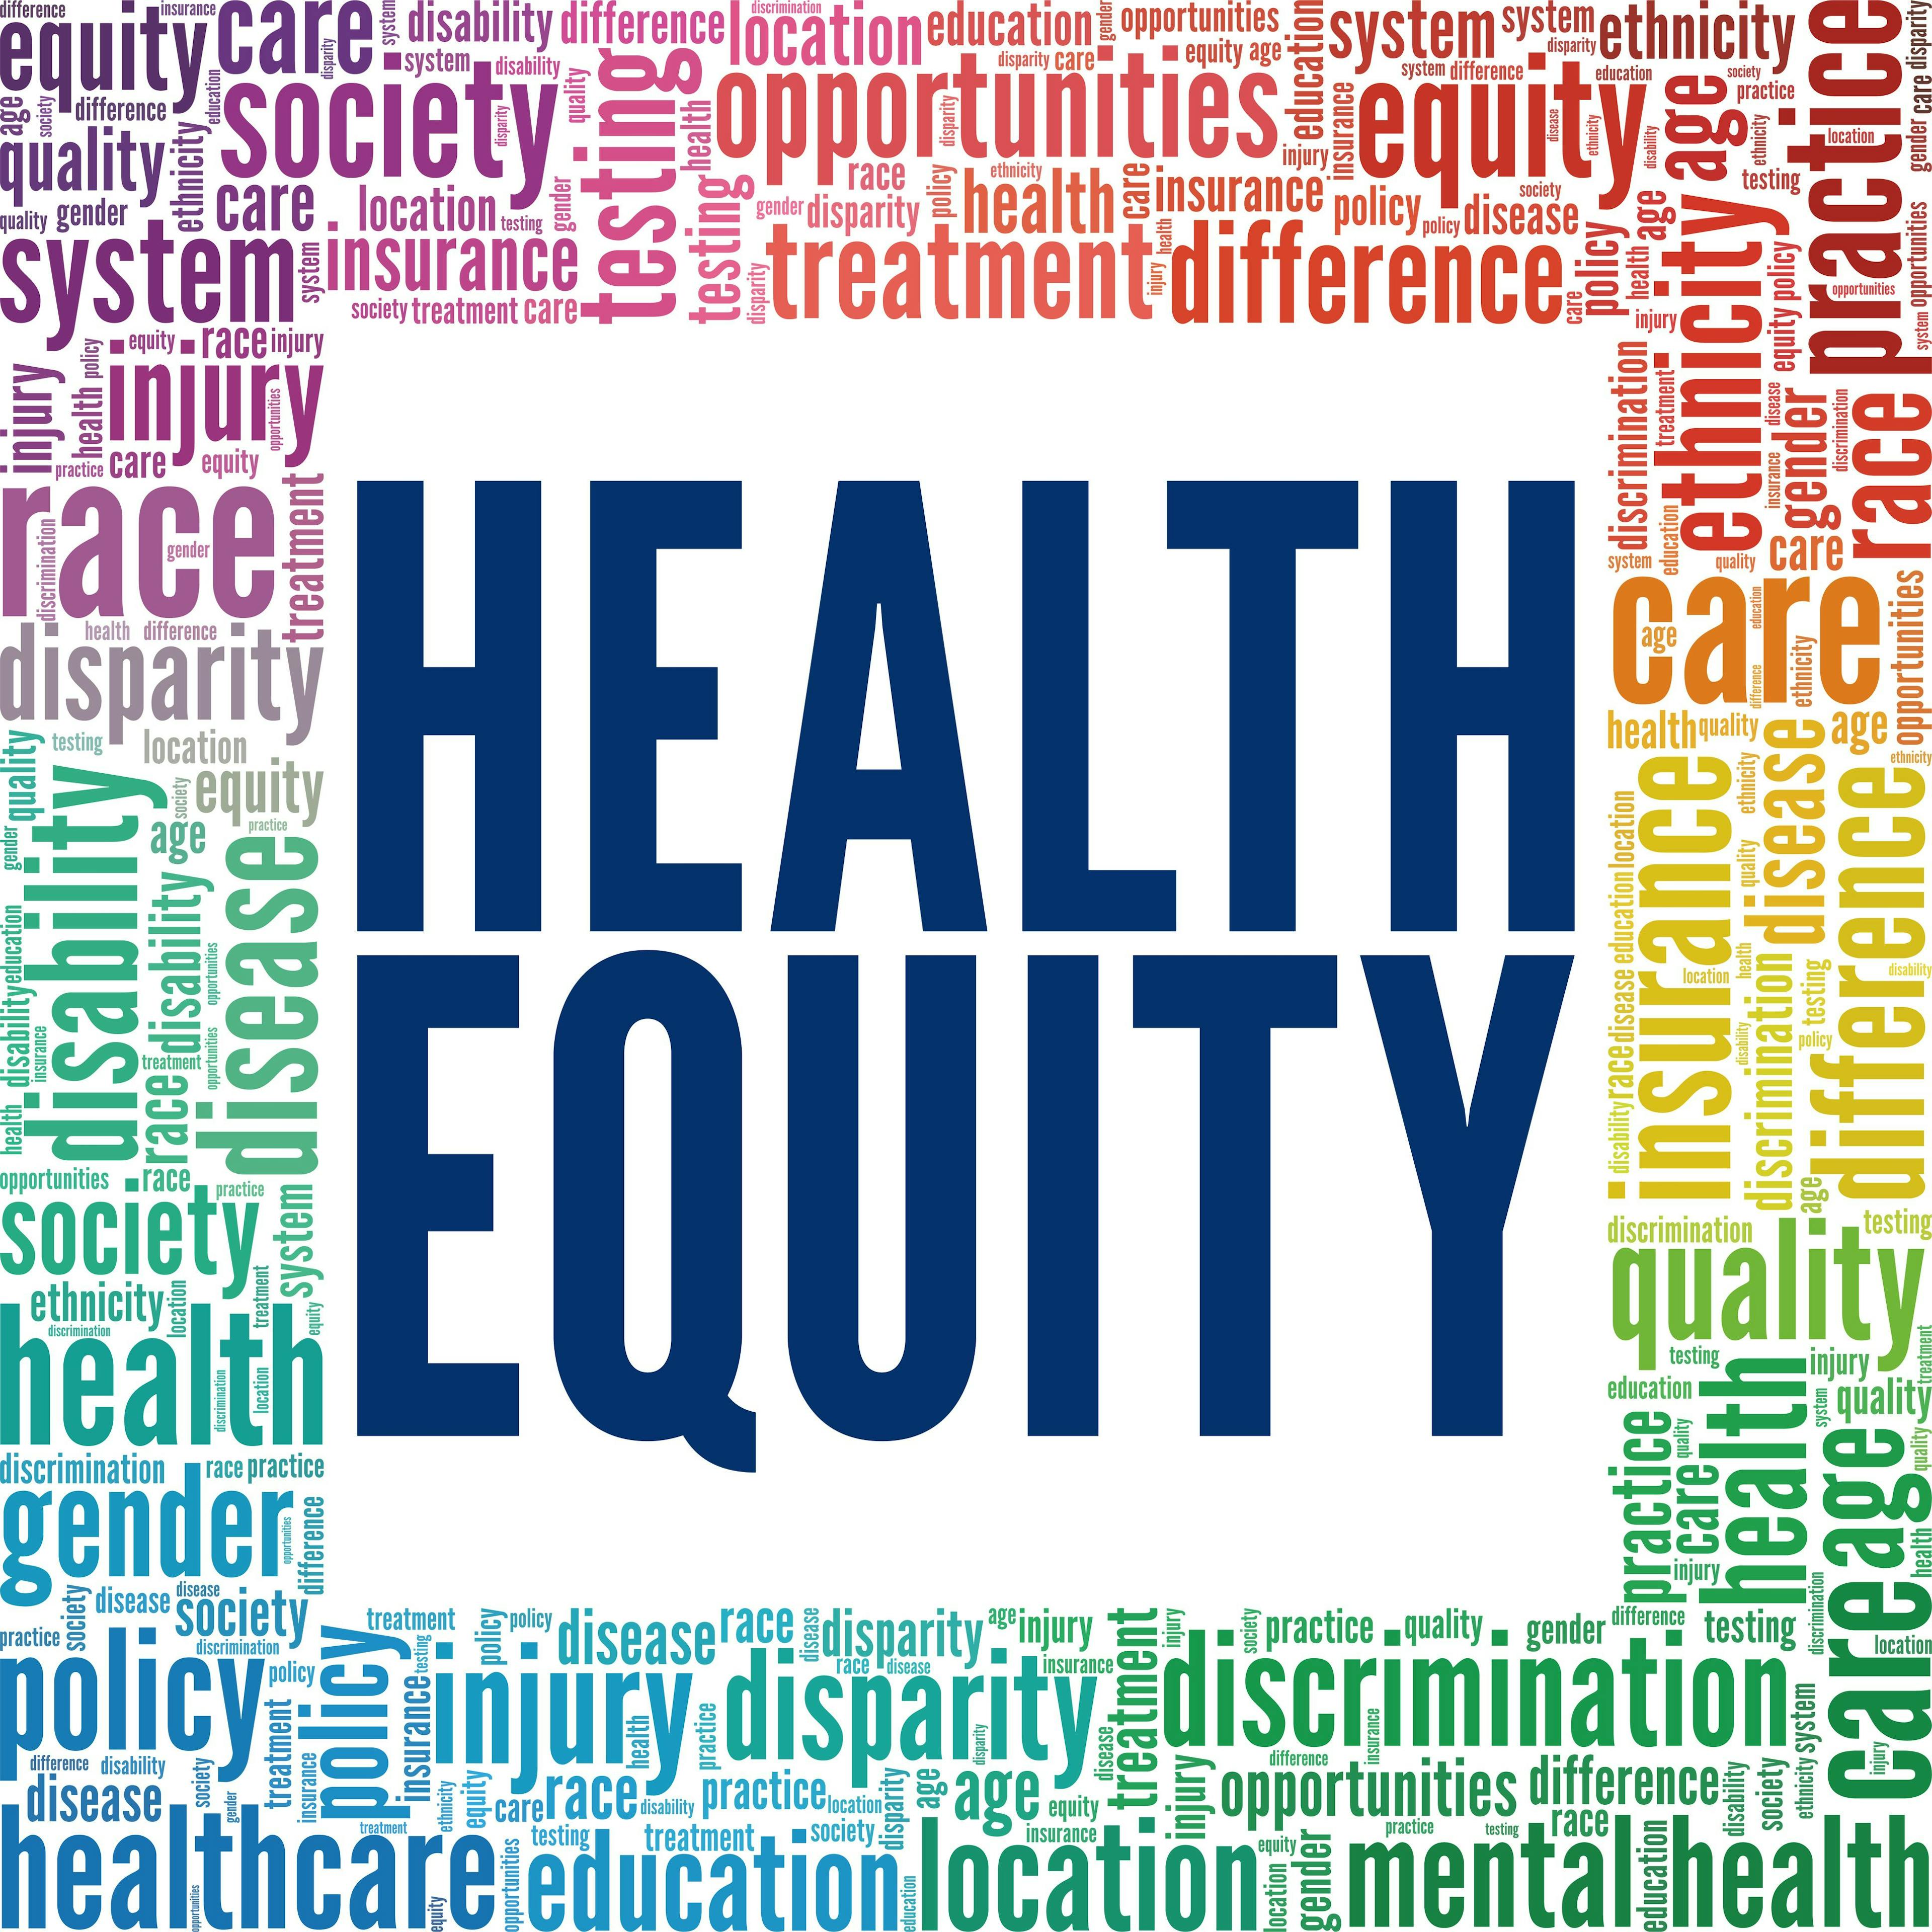 Health Equity Word Cloud | image credit: Colored Lights - stock.adobe.com